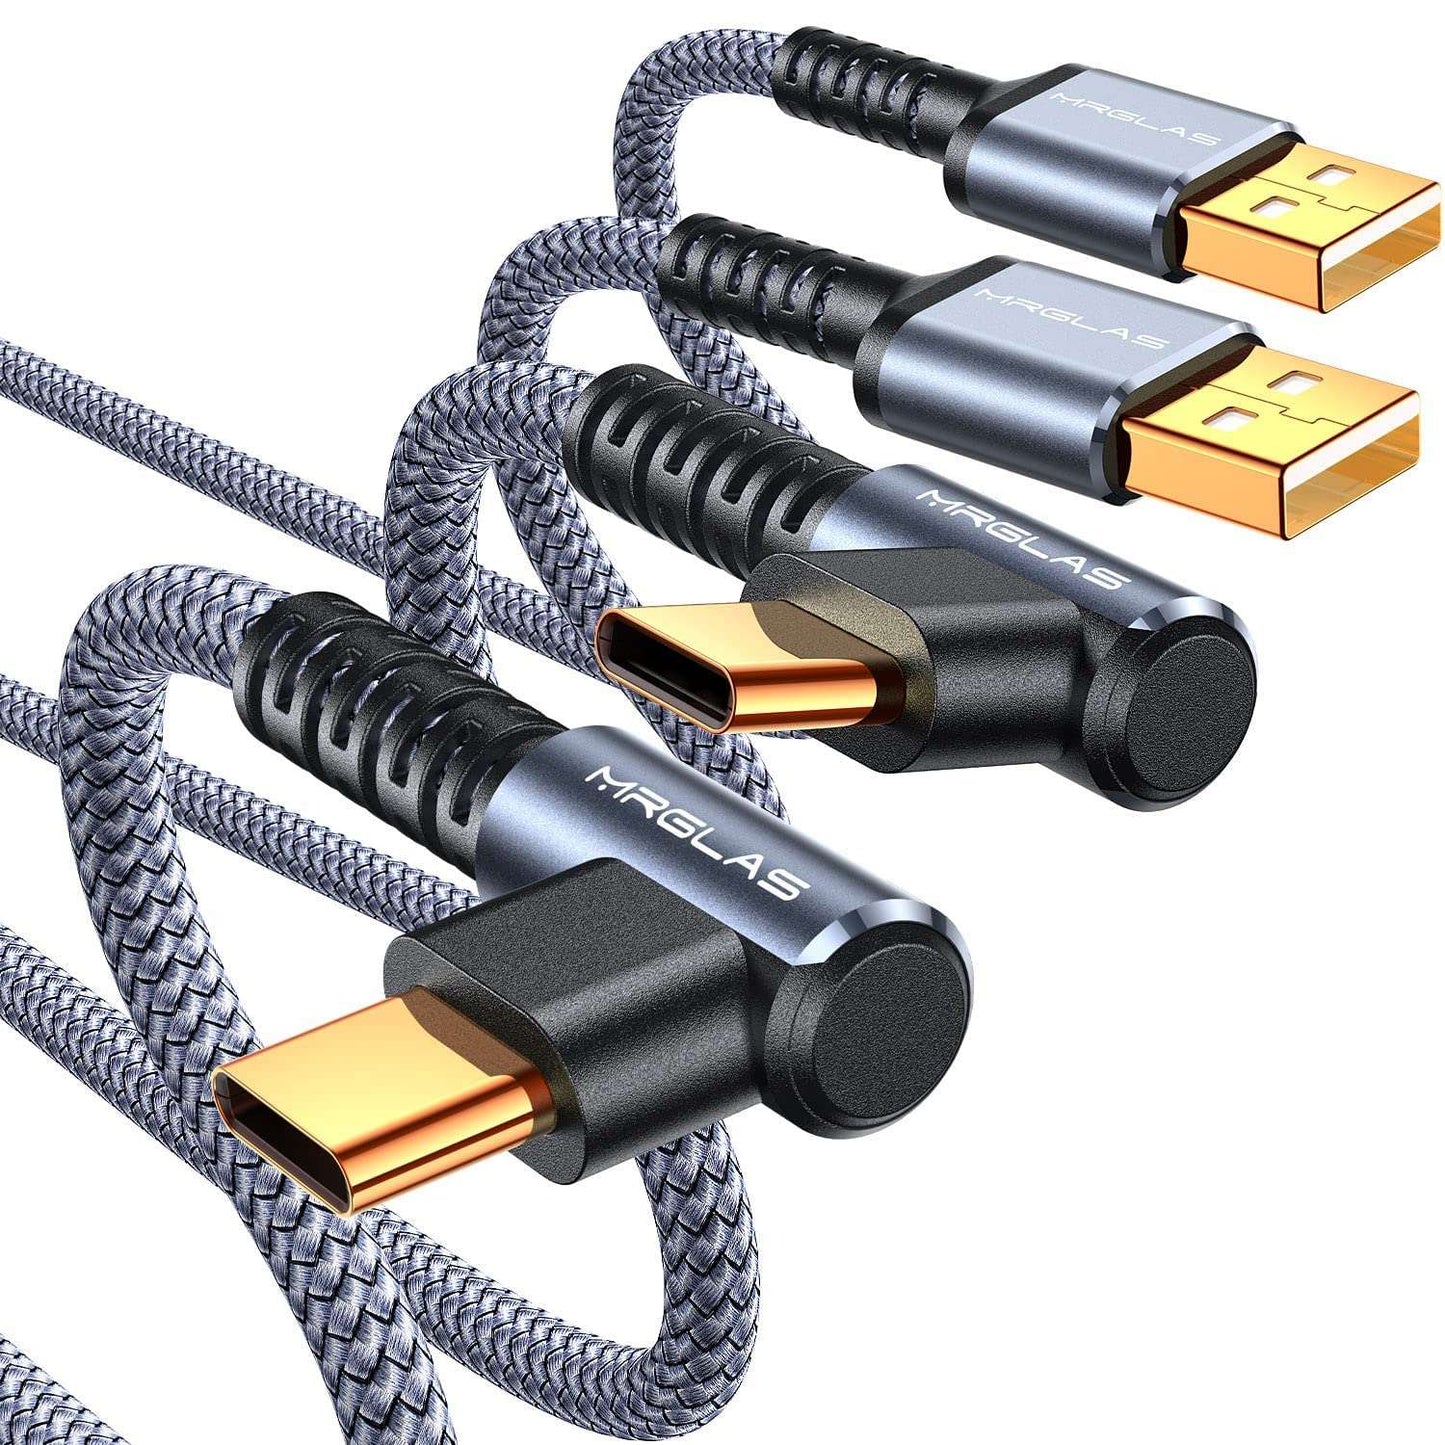 3.2A USB C Charger Cable, USB A to USB C Right Angle Cable Gold-Plated Type C Charger Fast Charging Nylon Braided Charging Cord Compatible with Galaxy S10 S9 Plus S21 Note 10 LG - Haassue